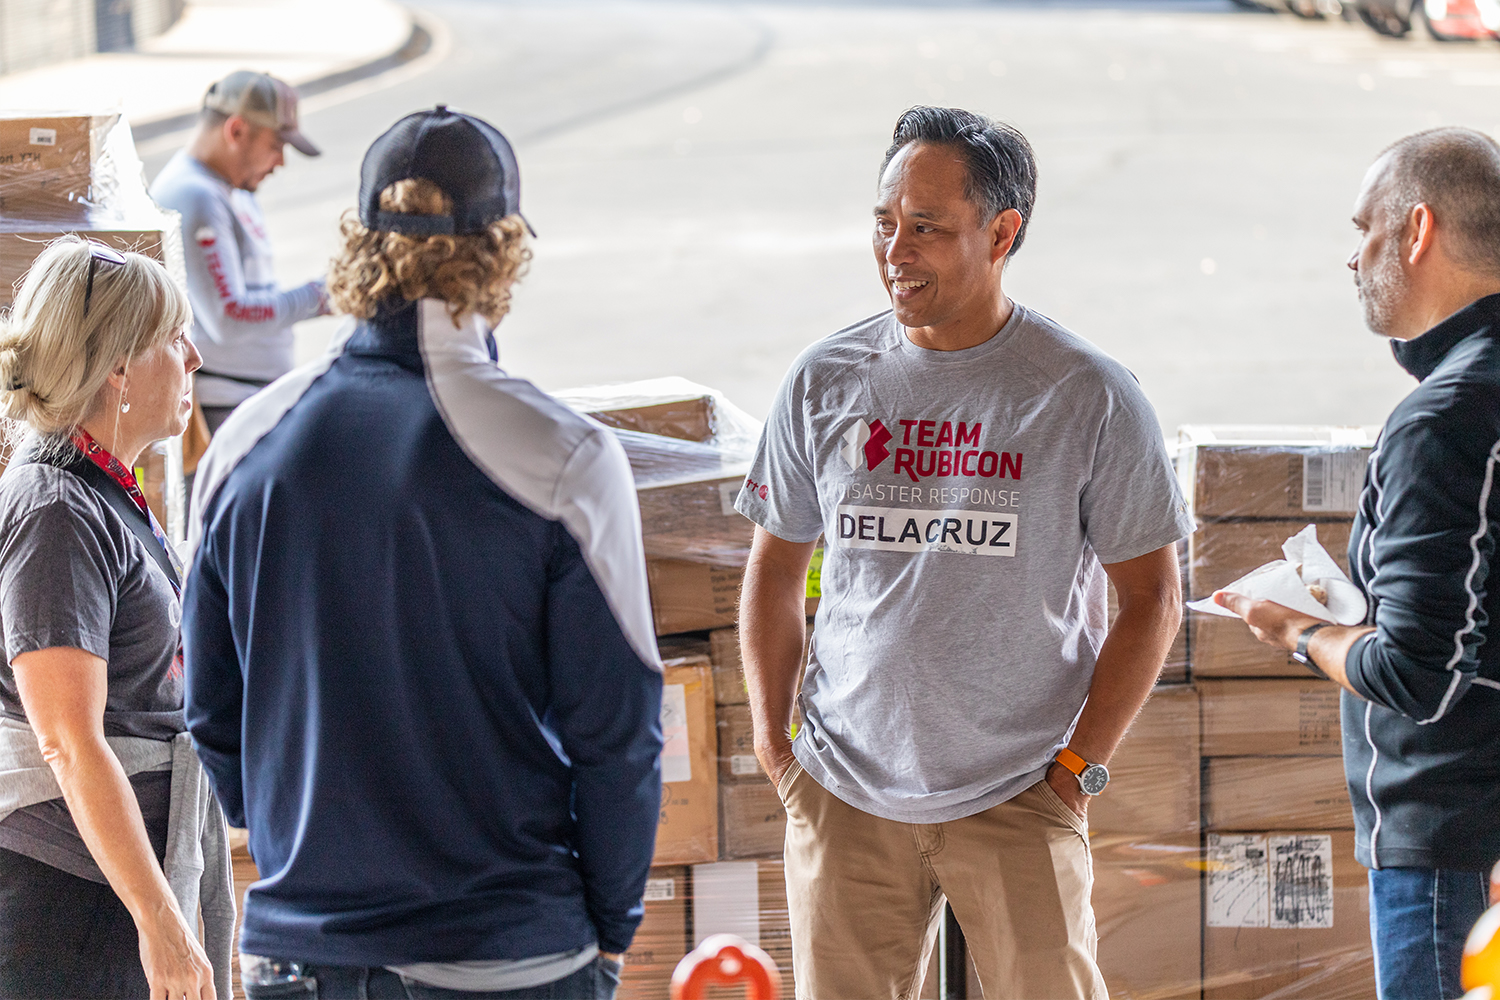 Team Rubicon CEO Art delaCruz in a grey T-shirt (second from right) standing in a group of people at a donation drive for Afghans in Minneapolis, MN on October 9, 2021